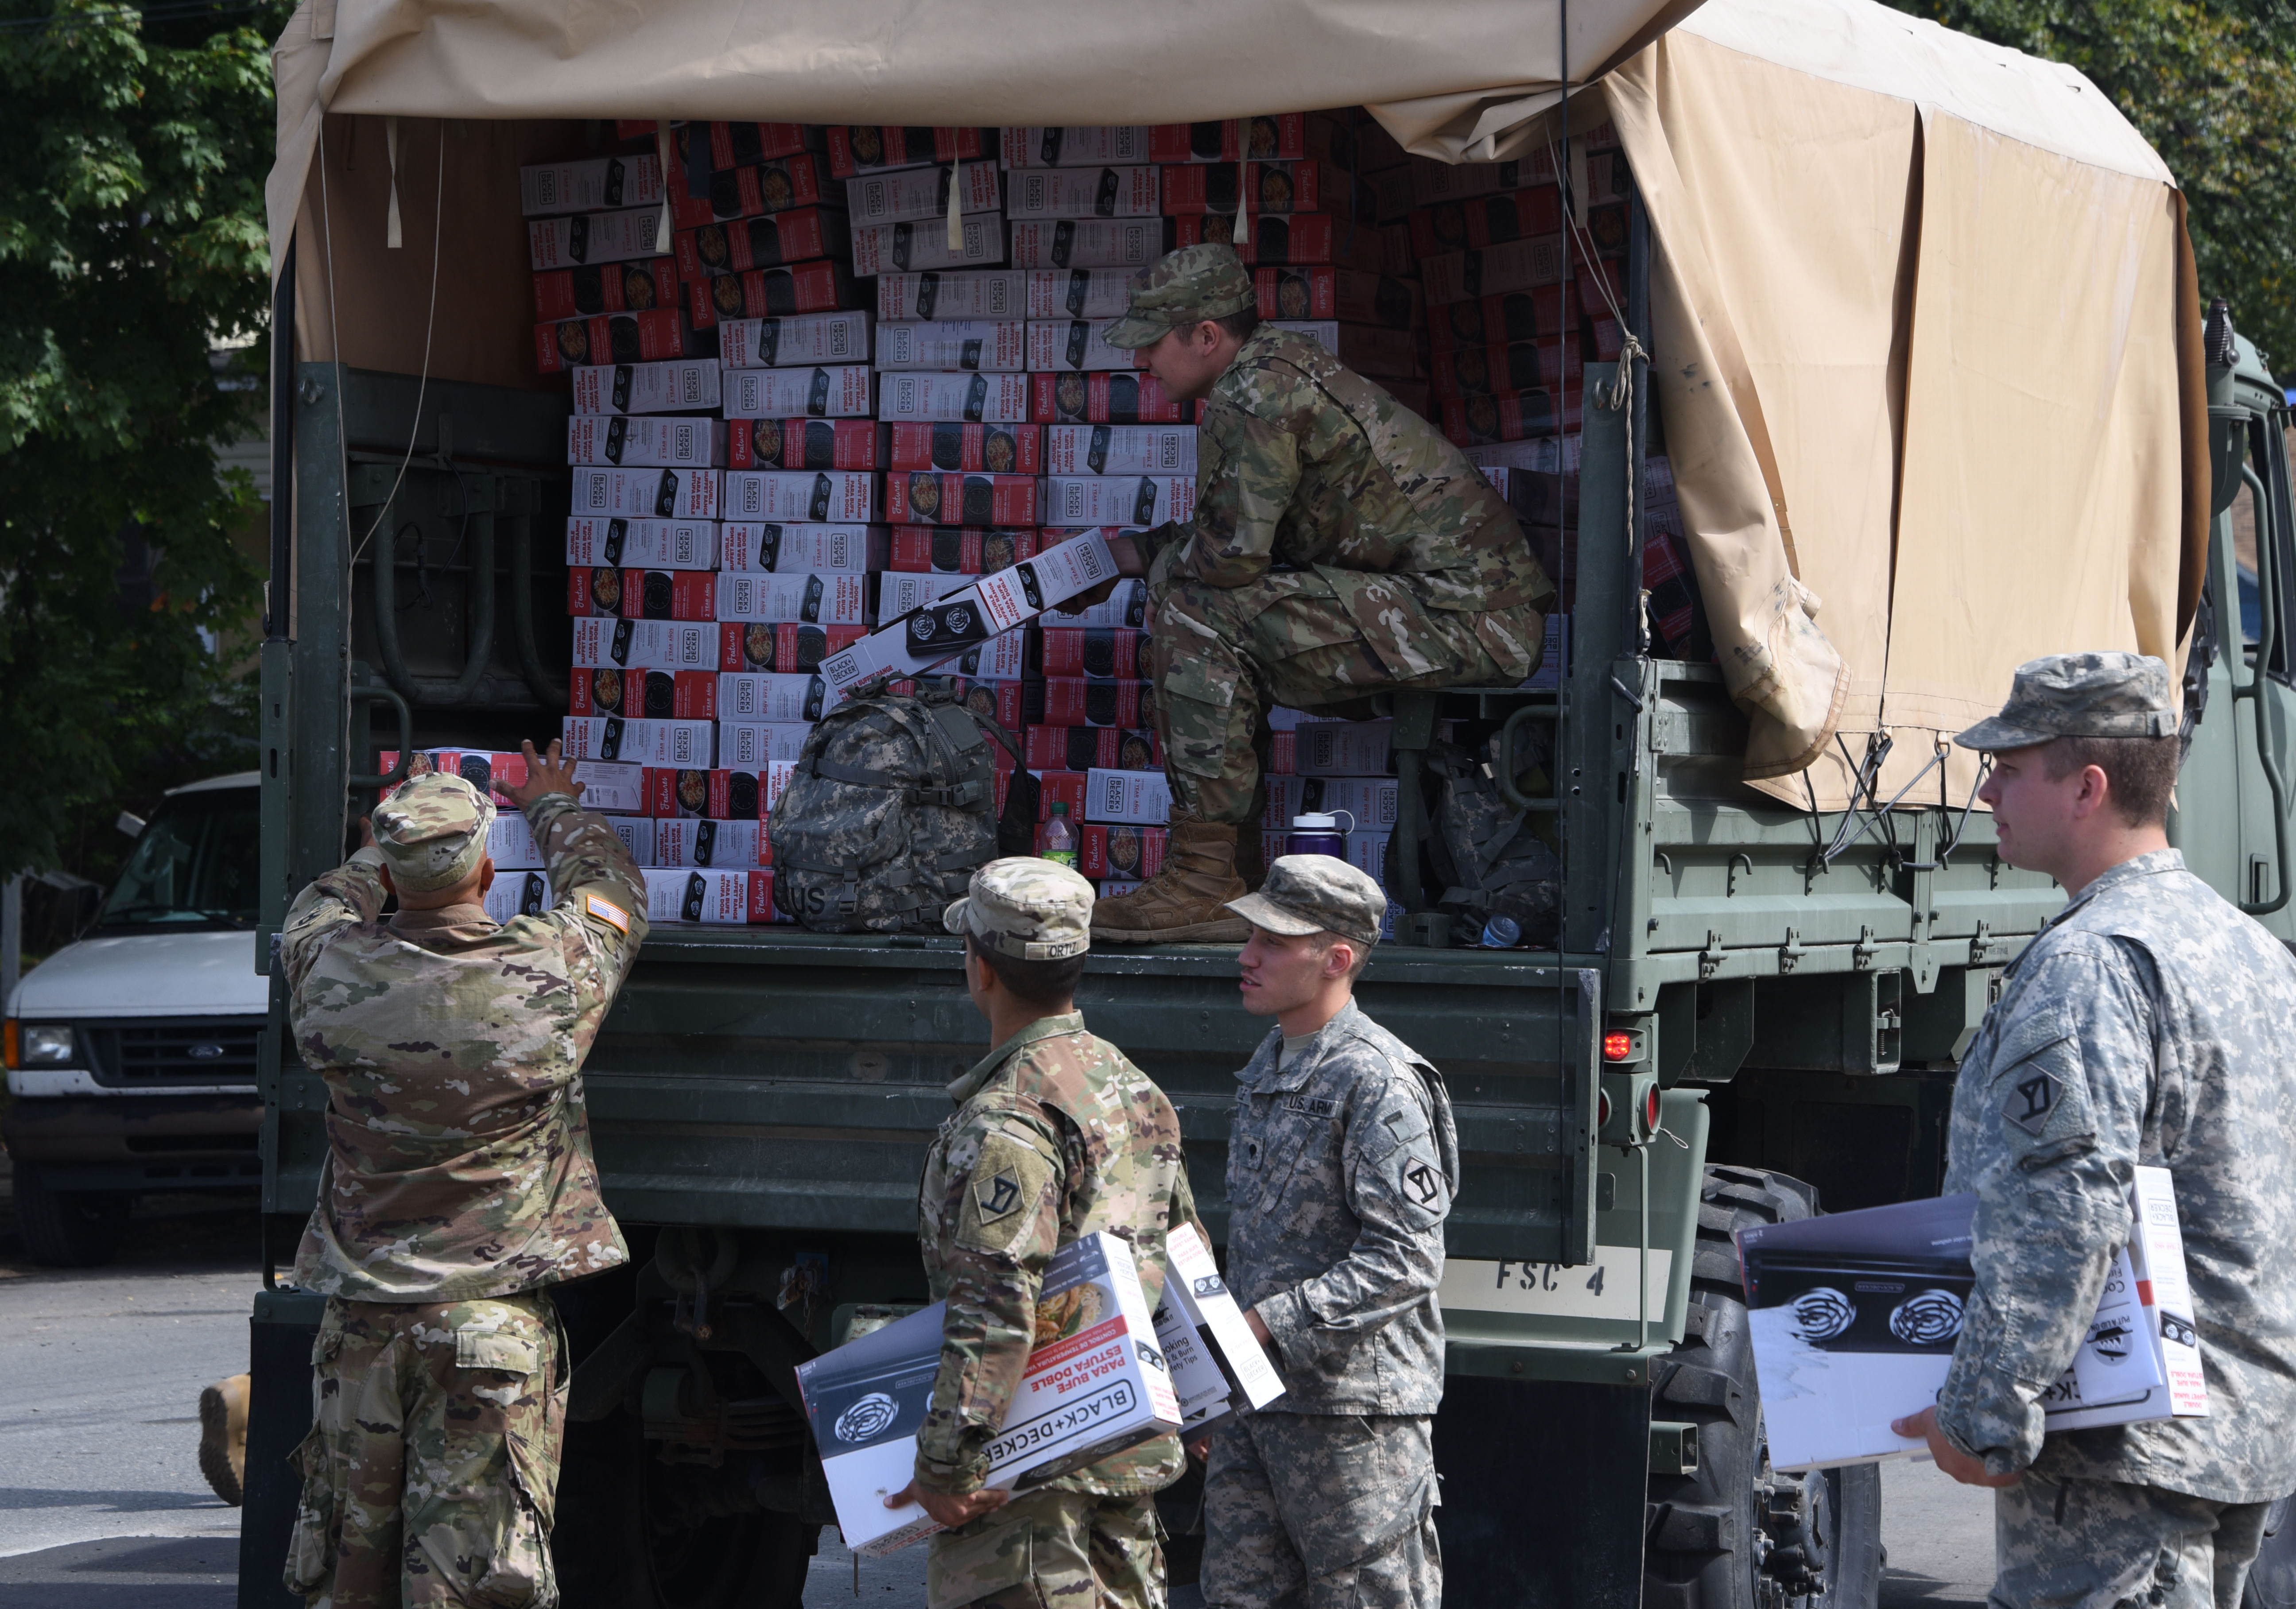 Soldiers of the 101 FSC, 101st  Engineering Battalion, hand out boxes of hot plates in Lawrence, Massachusetts on Sept. 23, 2018. National Guard soldiers and airmen delivered hundreds of hotplates to families throughout Lawrence after the gas explosions in the Merrimack Valley.